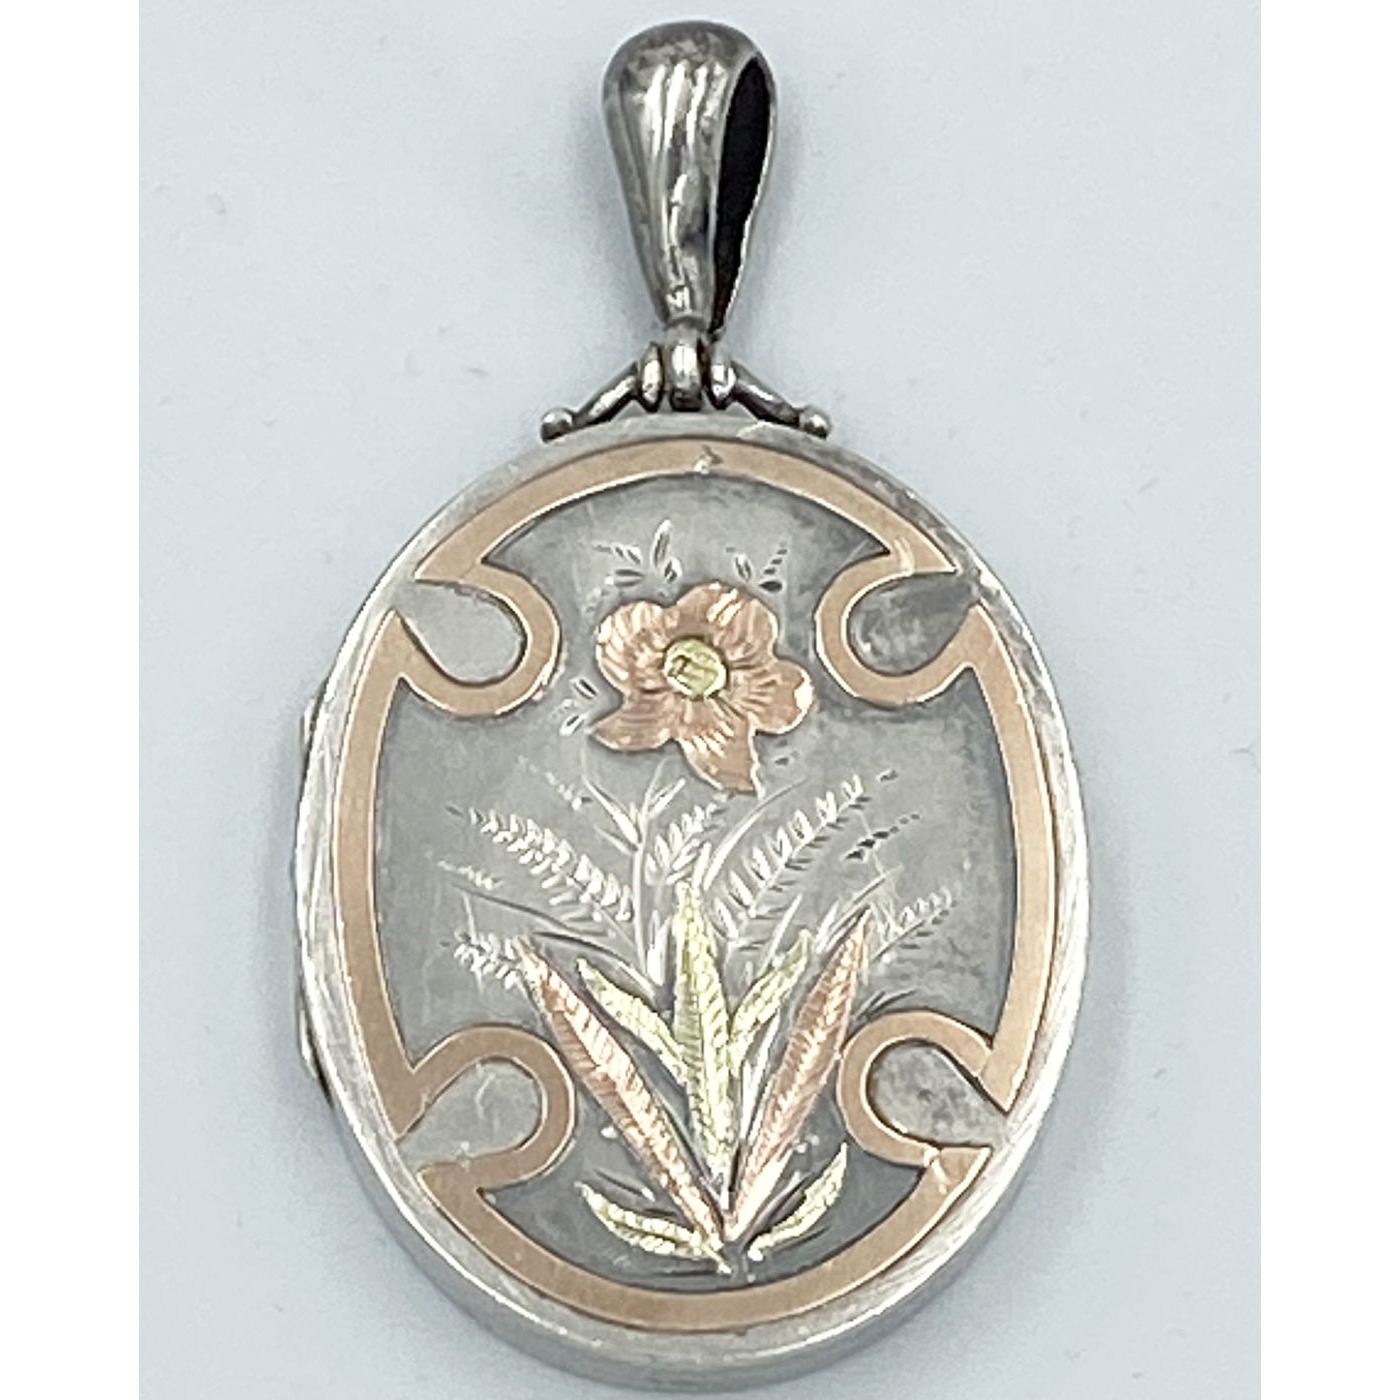 Fabulous Central Flower in Applied Yellow and Rose Gold Antique Silver English Locket